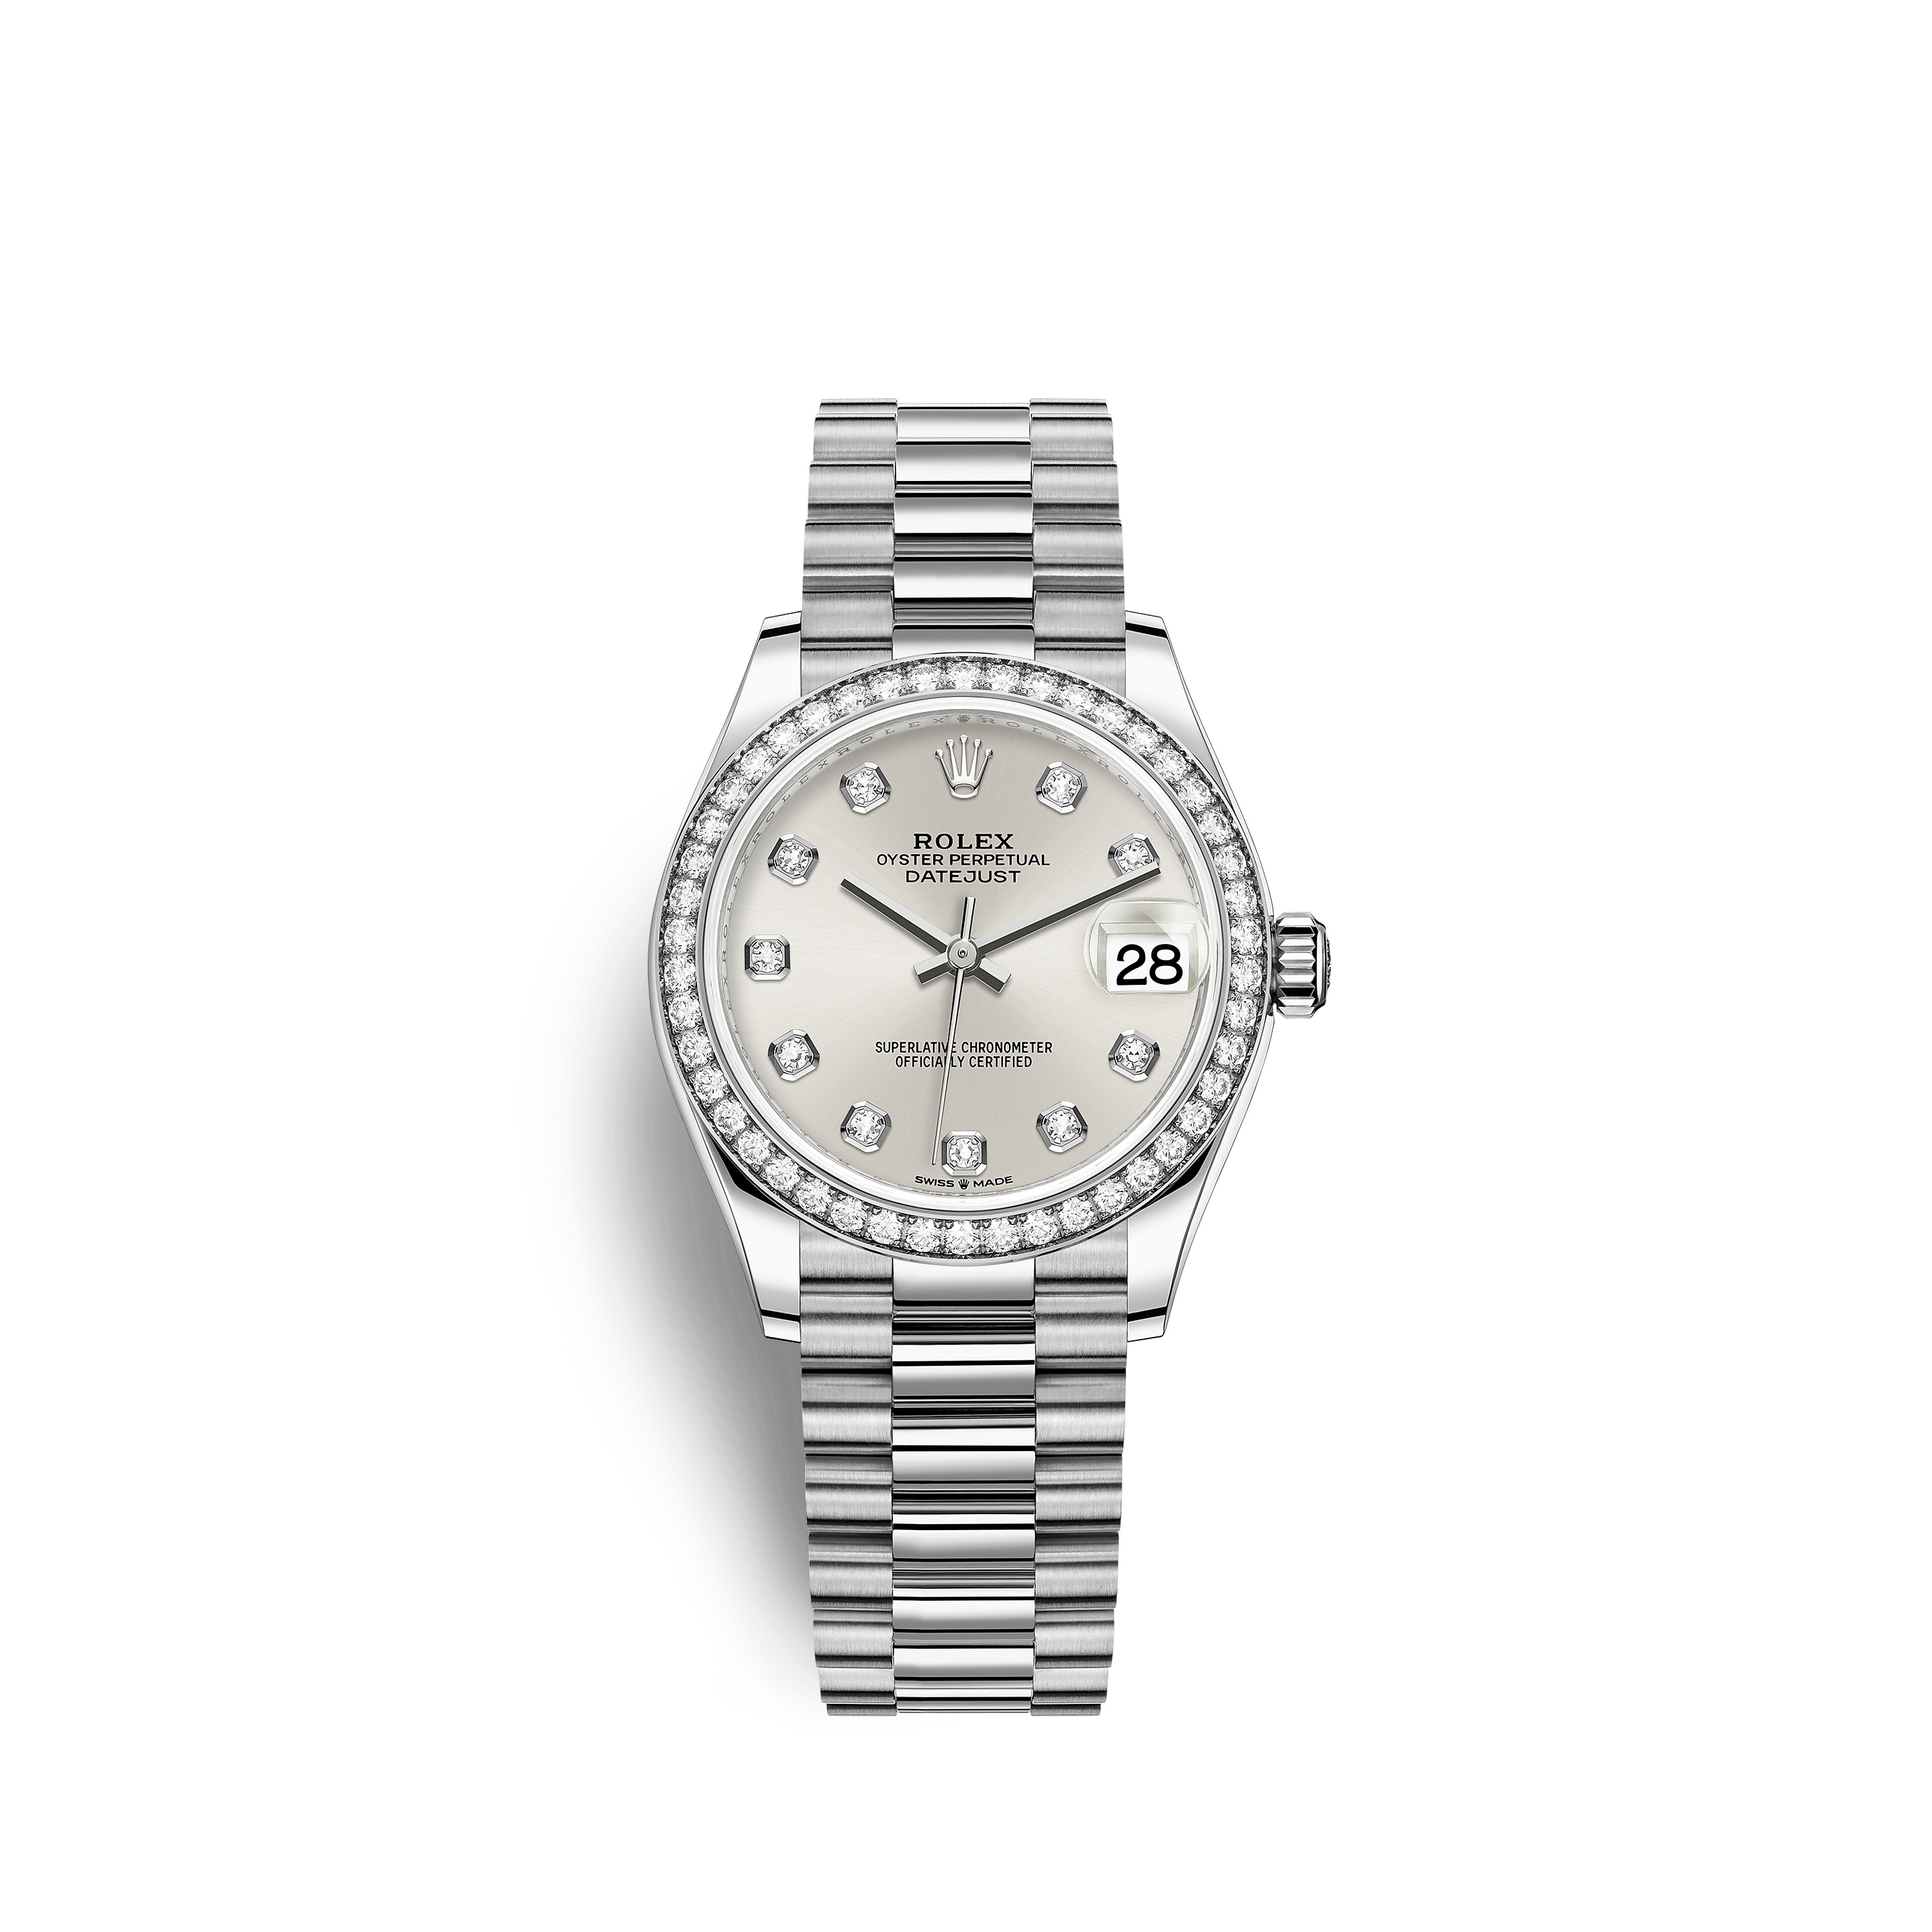 Datejust 31 278289RBR White Gold Watch (Silver Set with Diamonds)